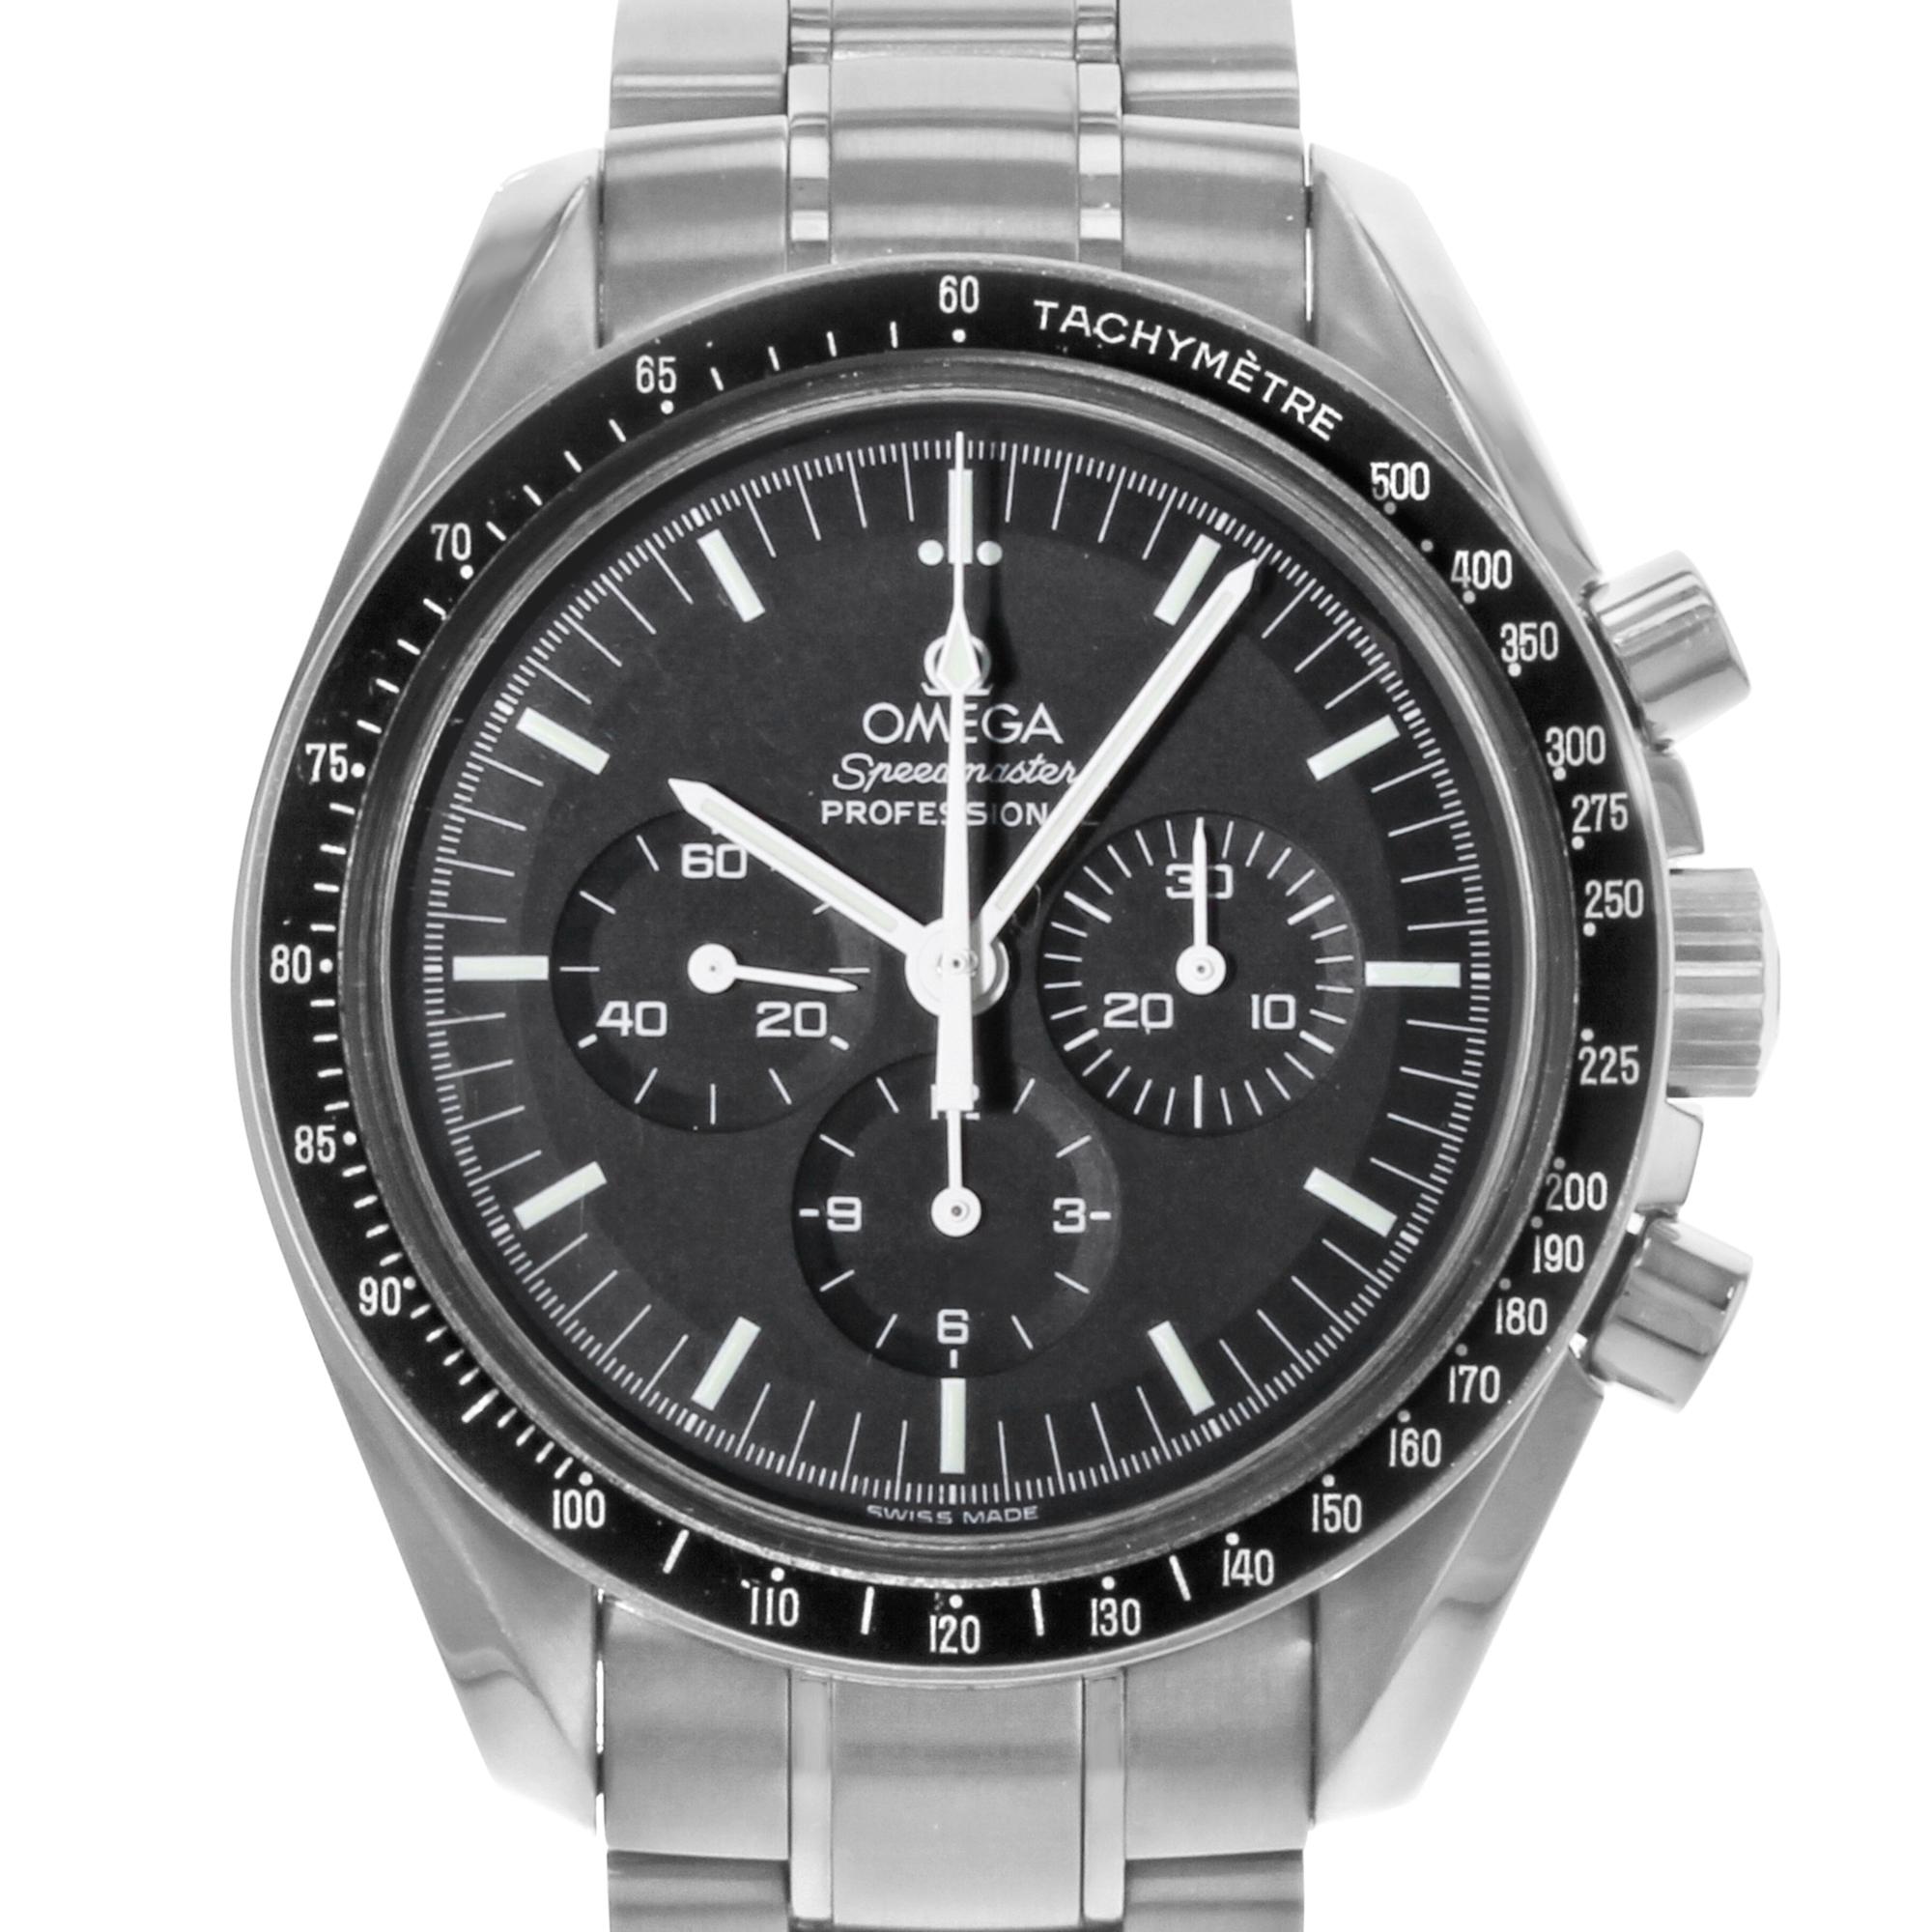 Pre Owned Omega Speedmaster Professional Moonwatch Steel Manual Wind Men's Watch 3570.50.00. The watch was produced in 2005. Watch Comes with a 2007 Card. This Beautiful Timepiece Features: Stainless Steel Case & Bracelet, Fixed Stainless Steel